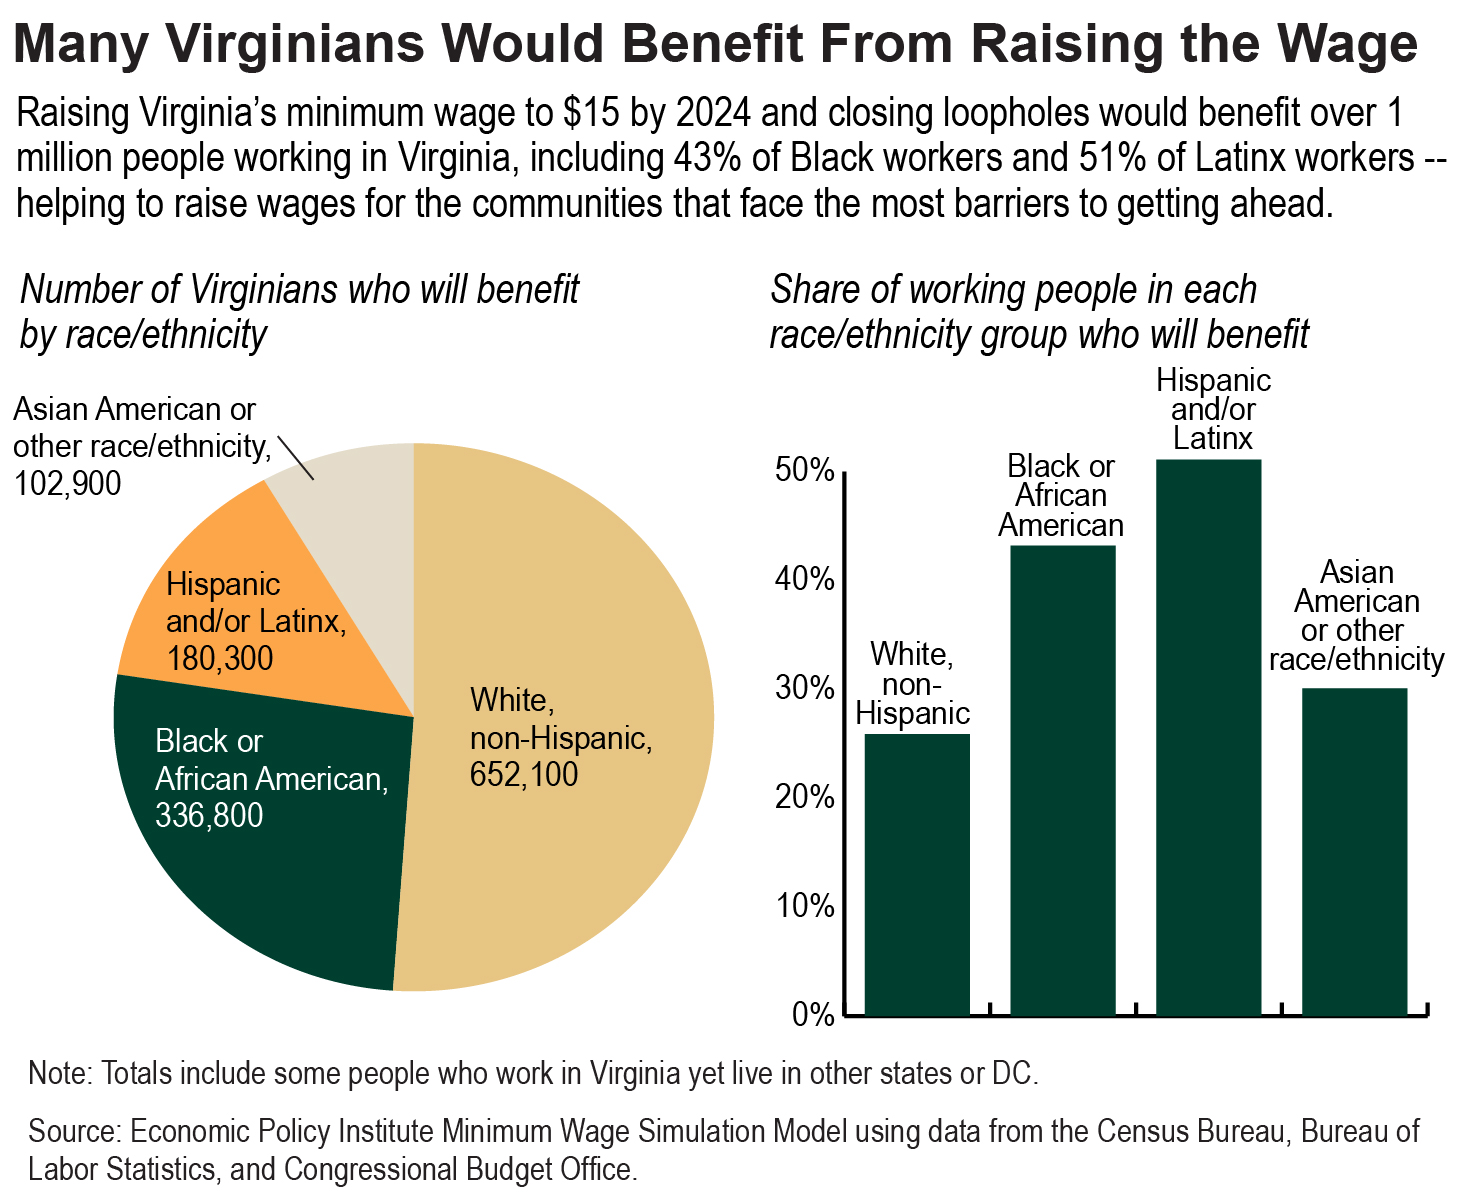 A circle graph showing the number of Virginians who will benefit from a $15 minimum wage by race and ethnicity as well as a bar graph showing the share of working people in each race/ethnicity group who will benefit